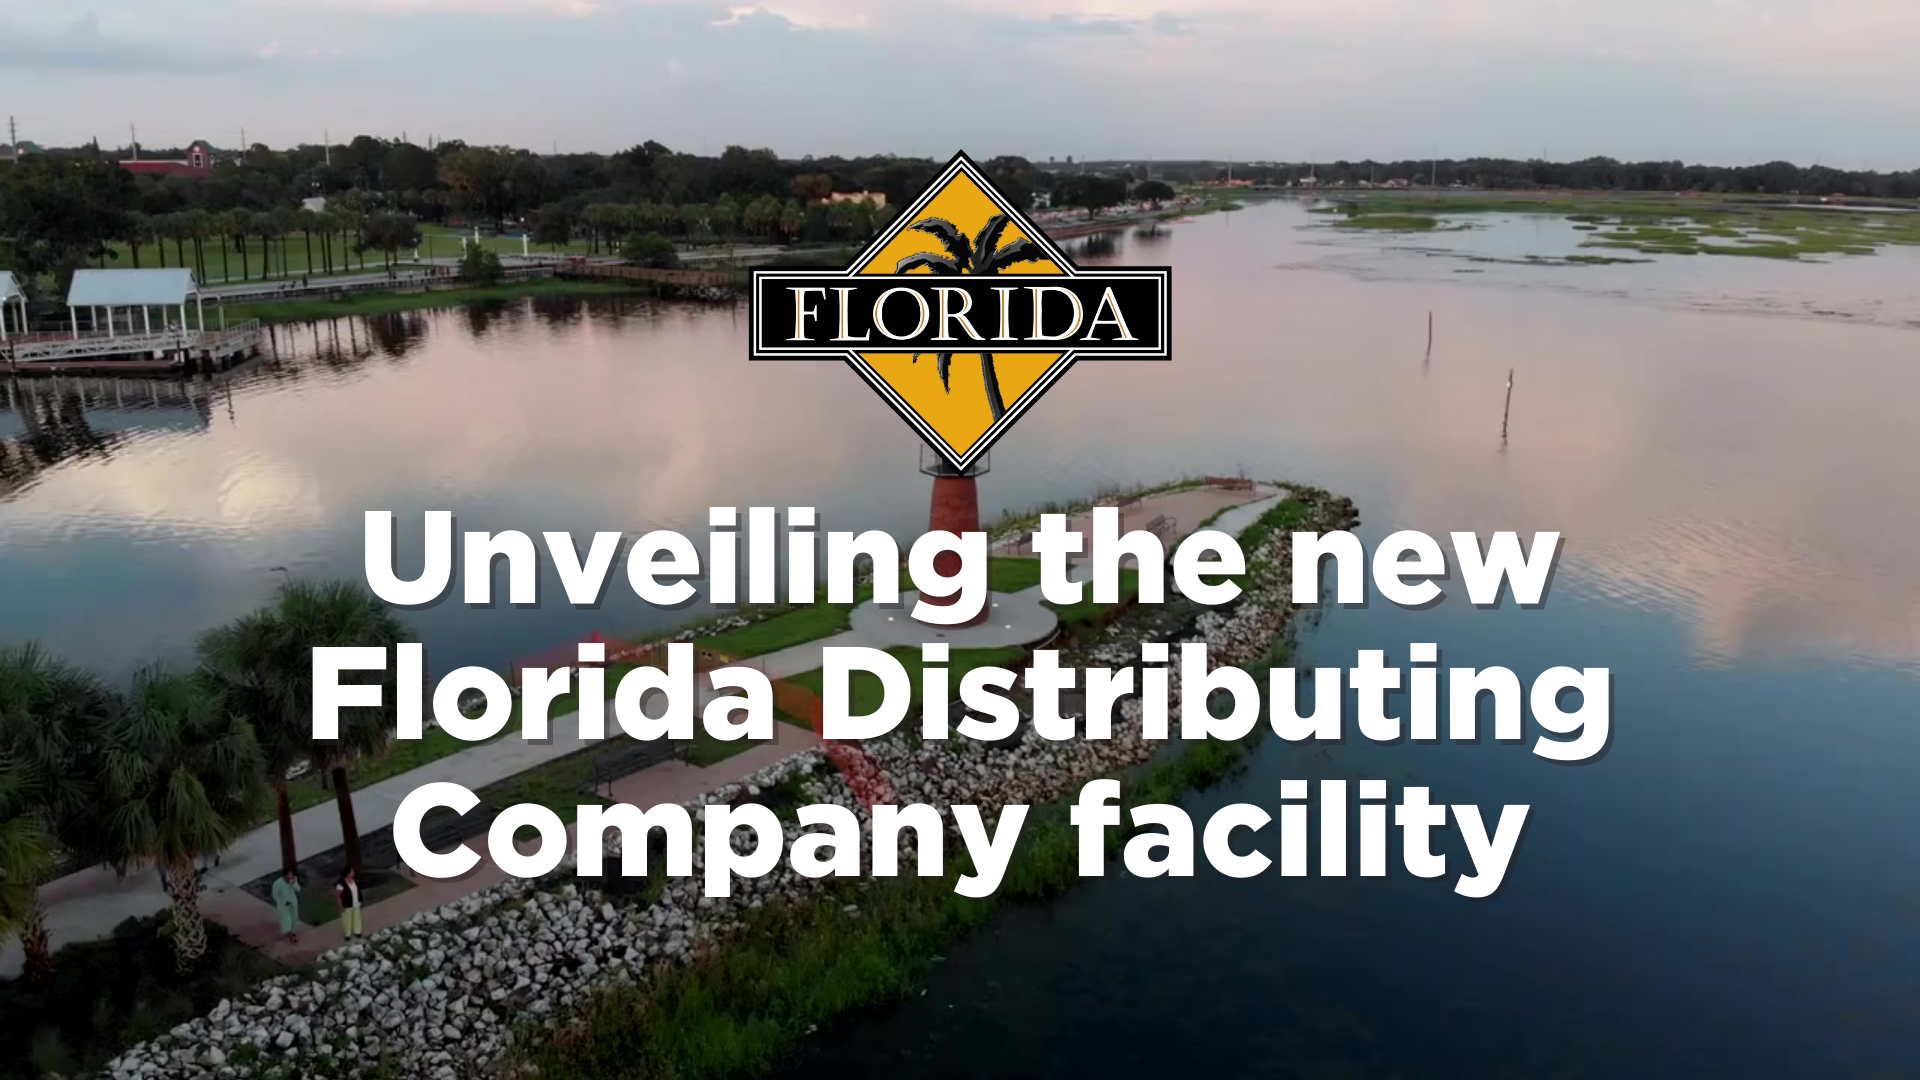 Logo and text unveiling the new Florida Distributing Company facility